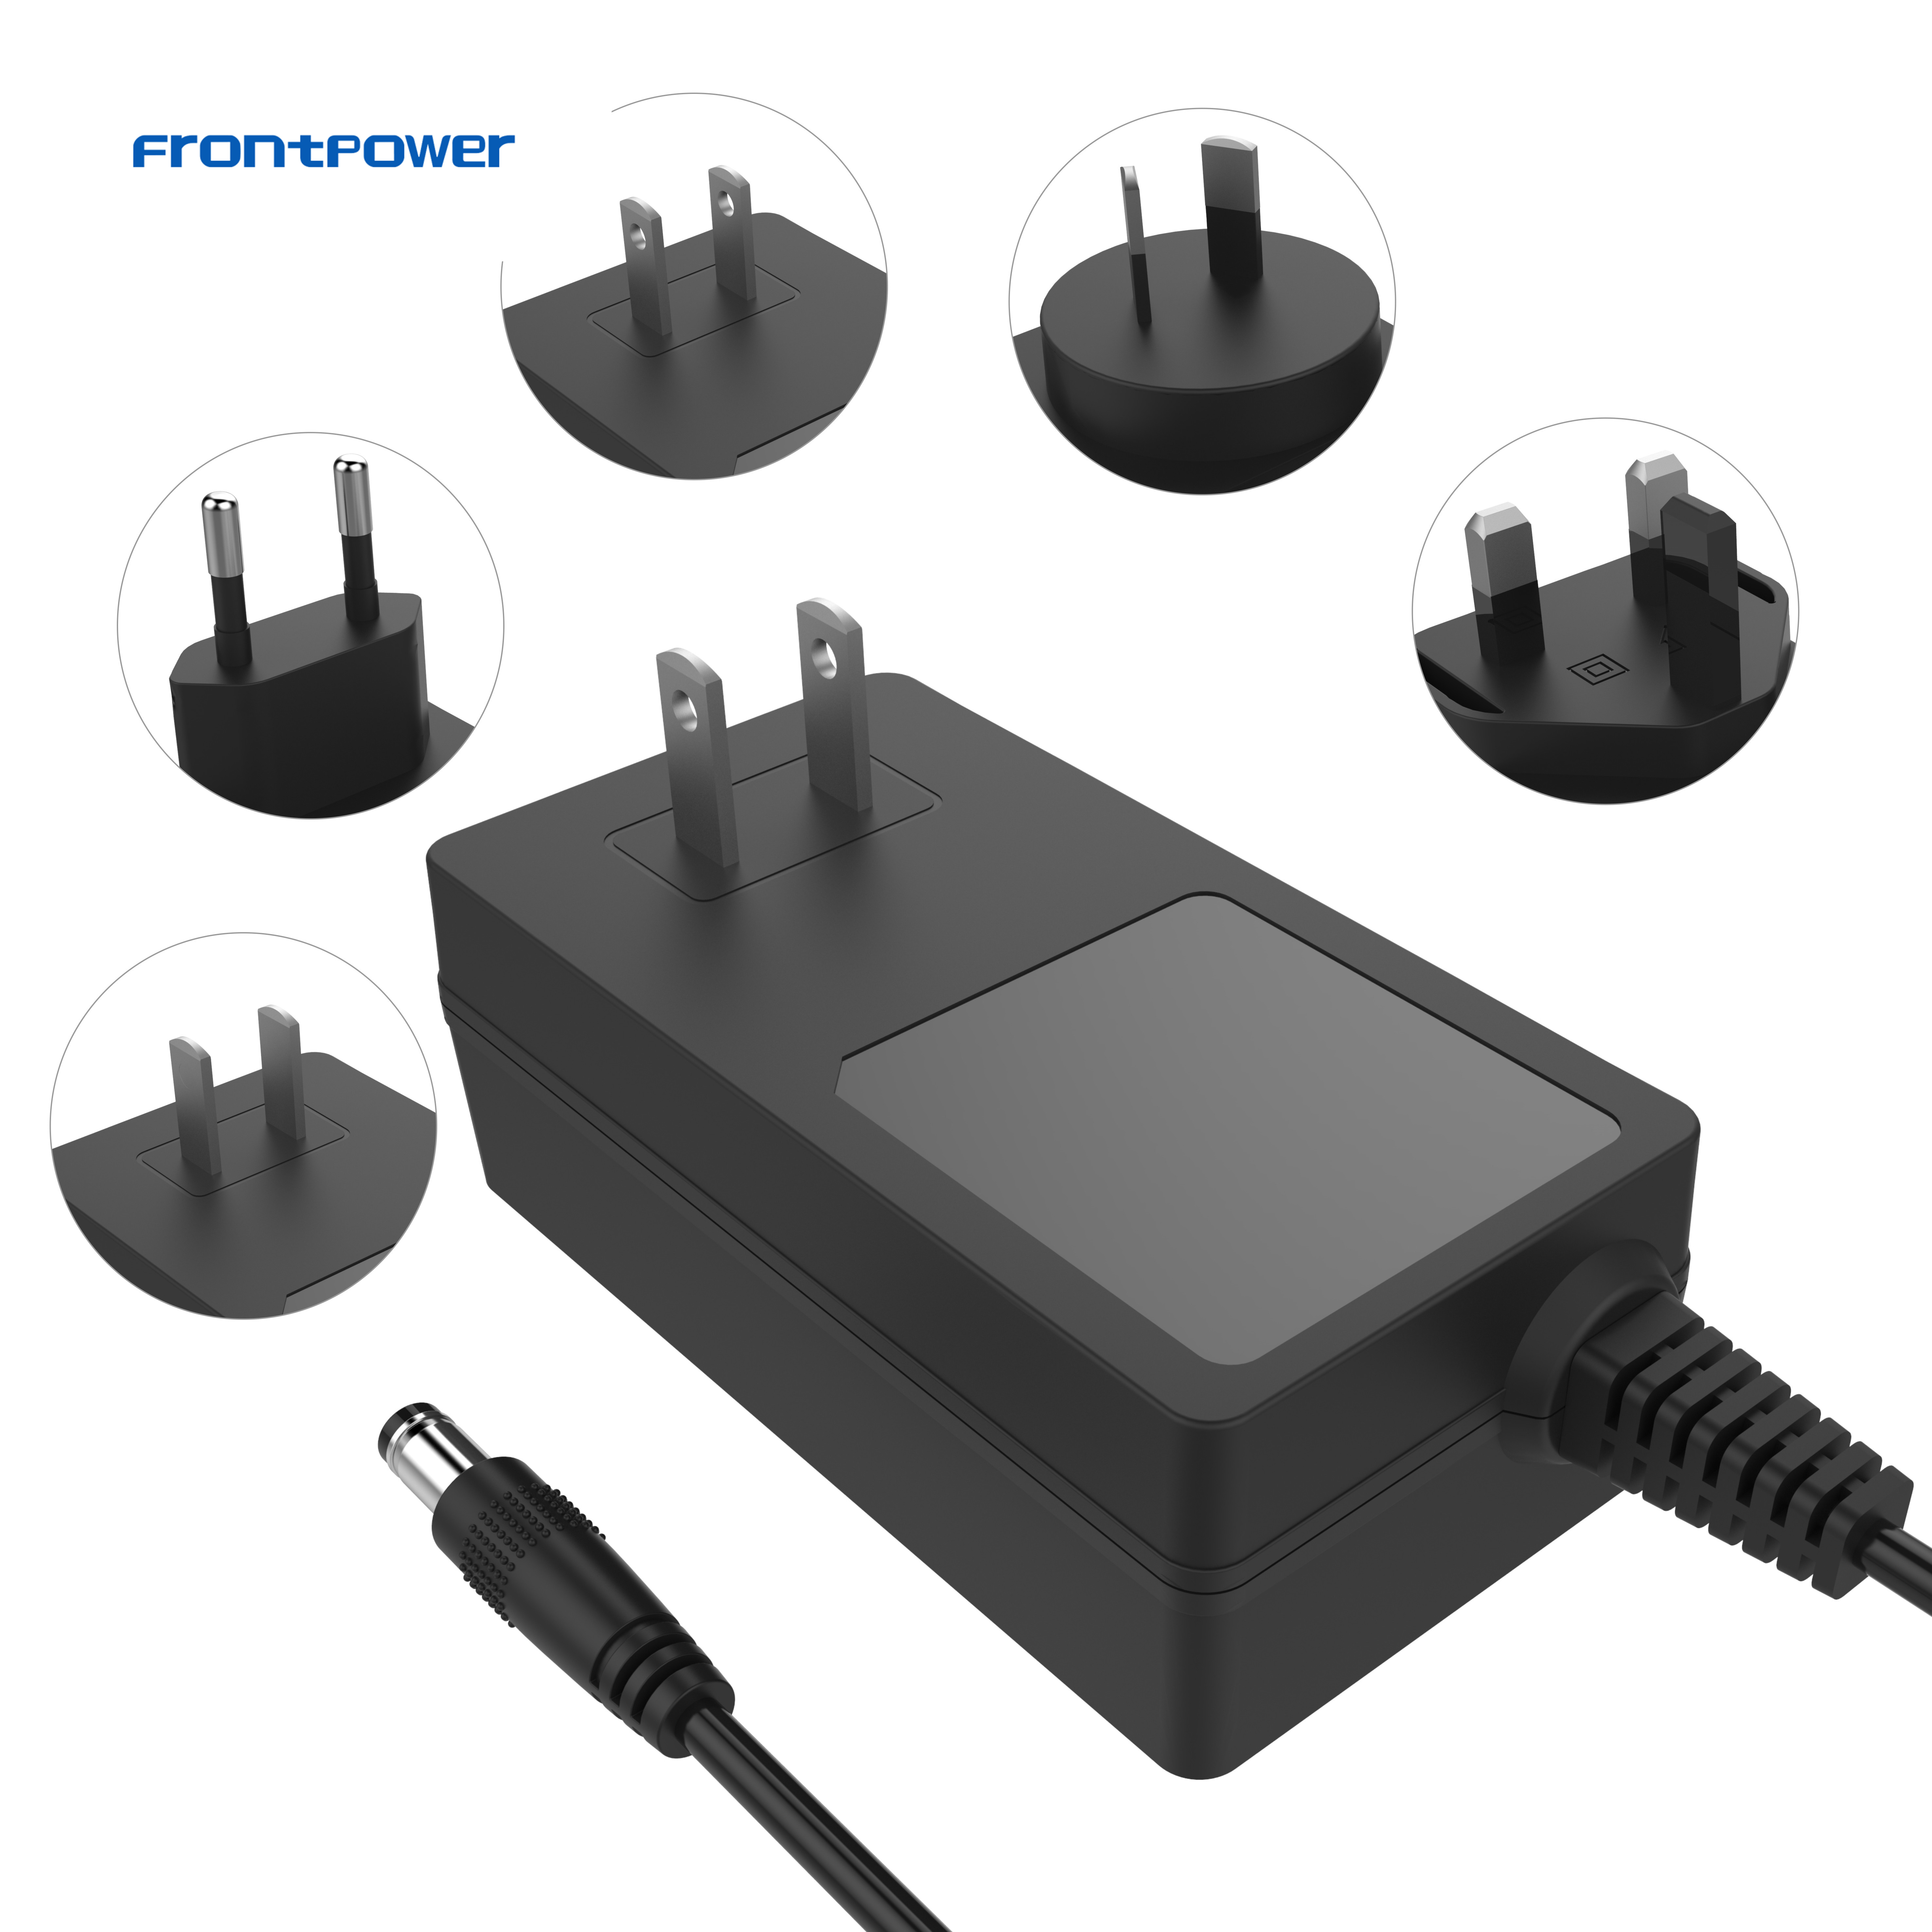 12V 4A 15V 3A 24V 2A 15V 3.2A US EU UK AU Plug Wall Power Adapter Supply Switch ACDC Charger SMPS UL ETL for Laptop Wifi Router